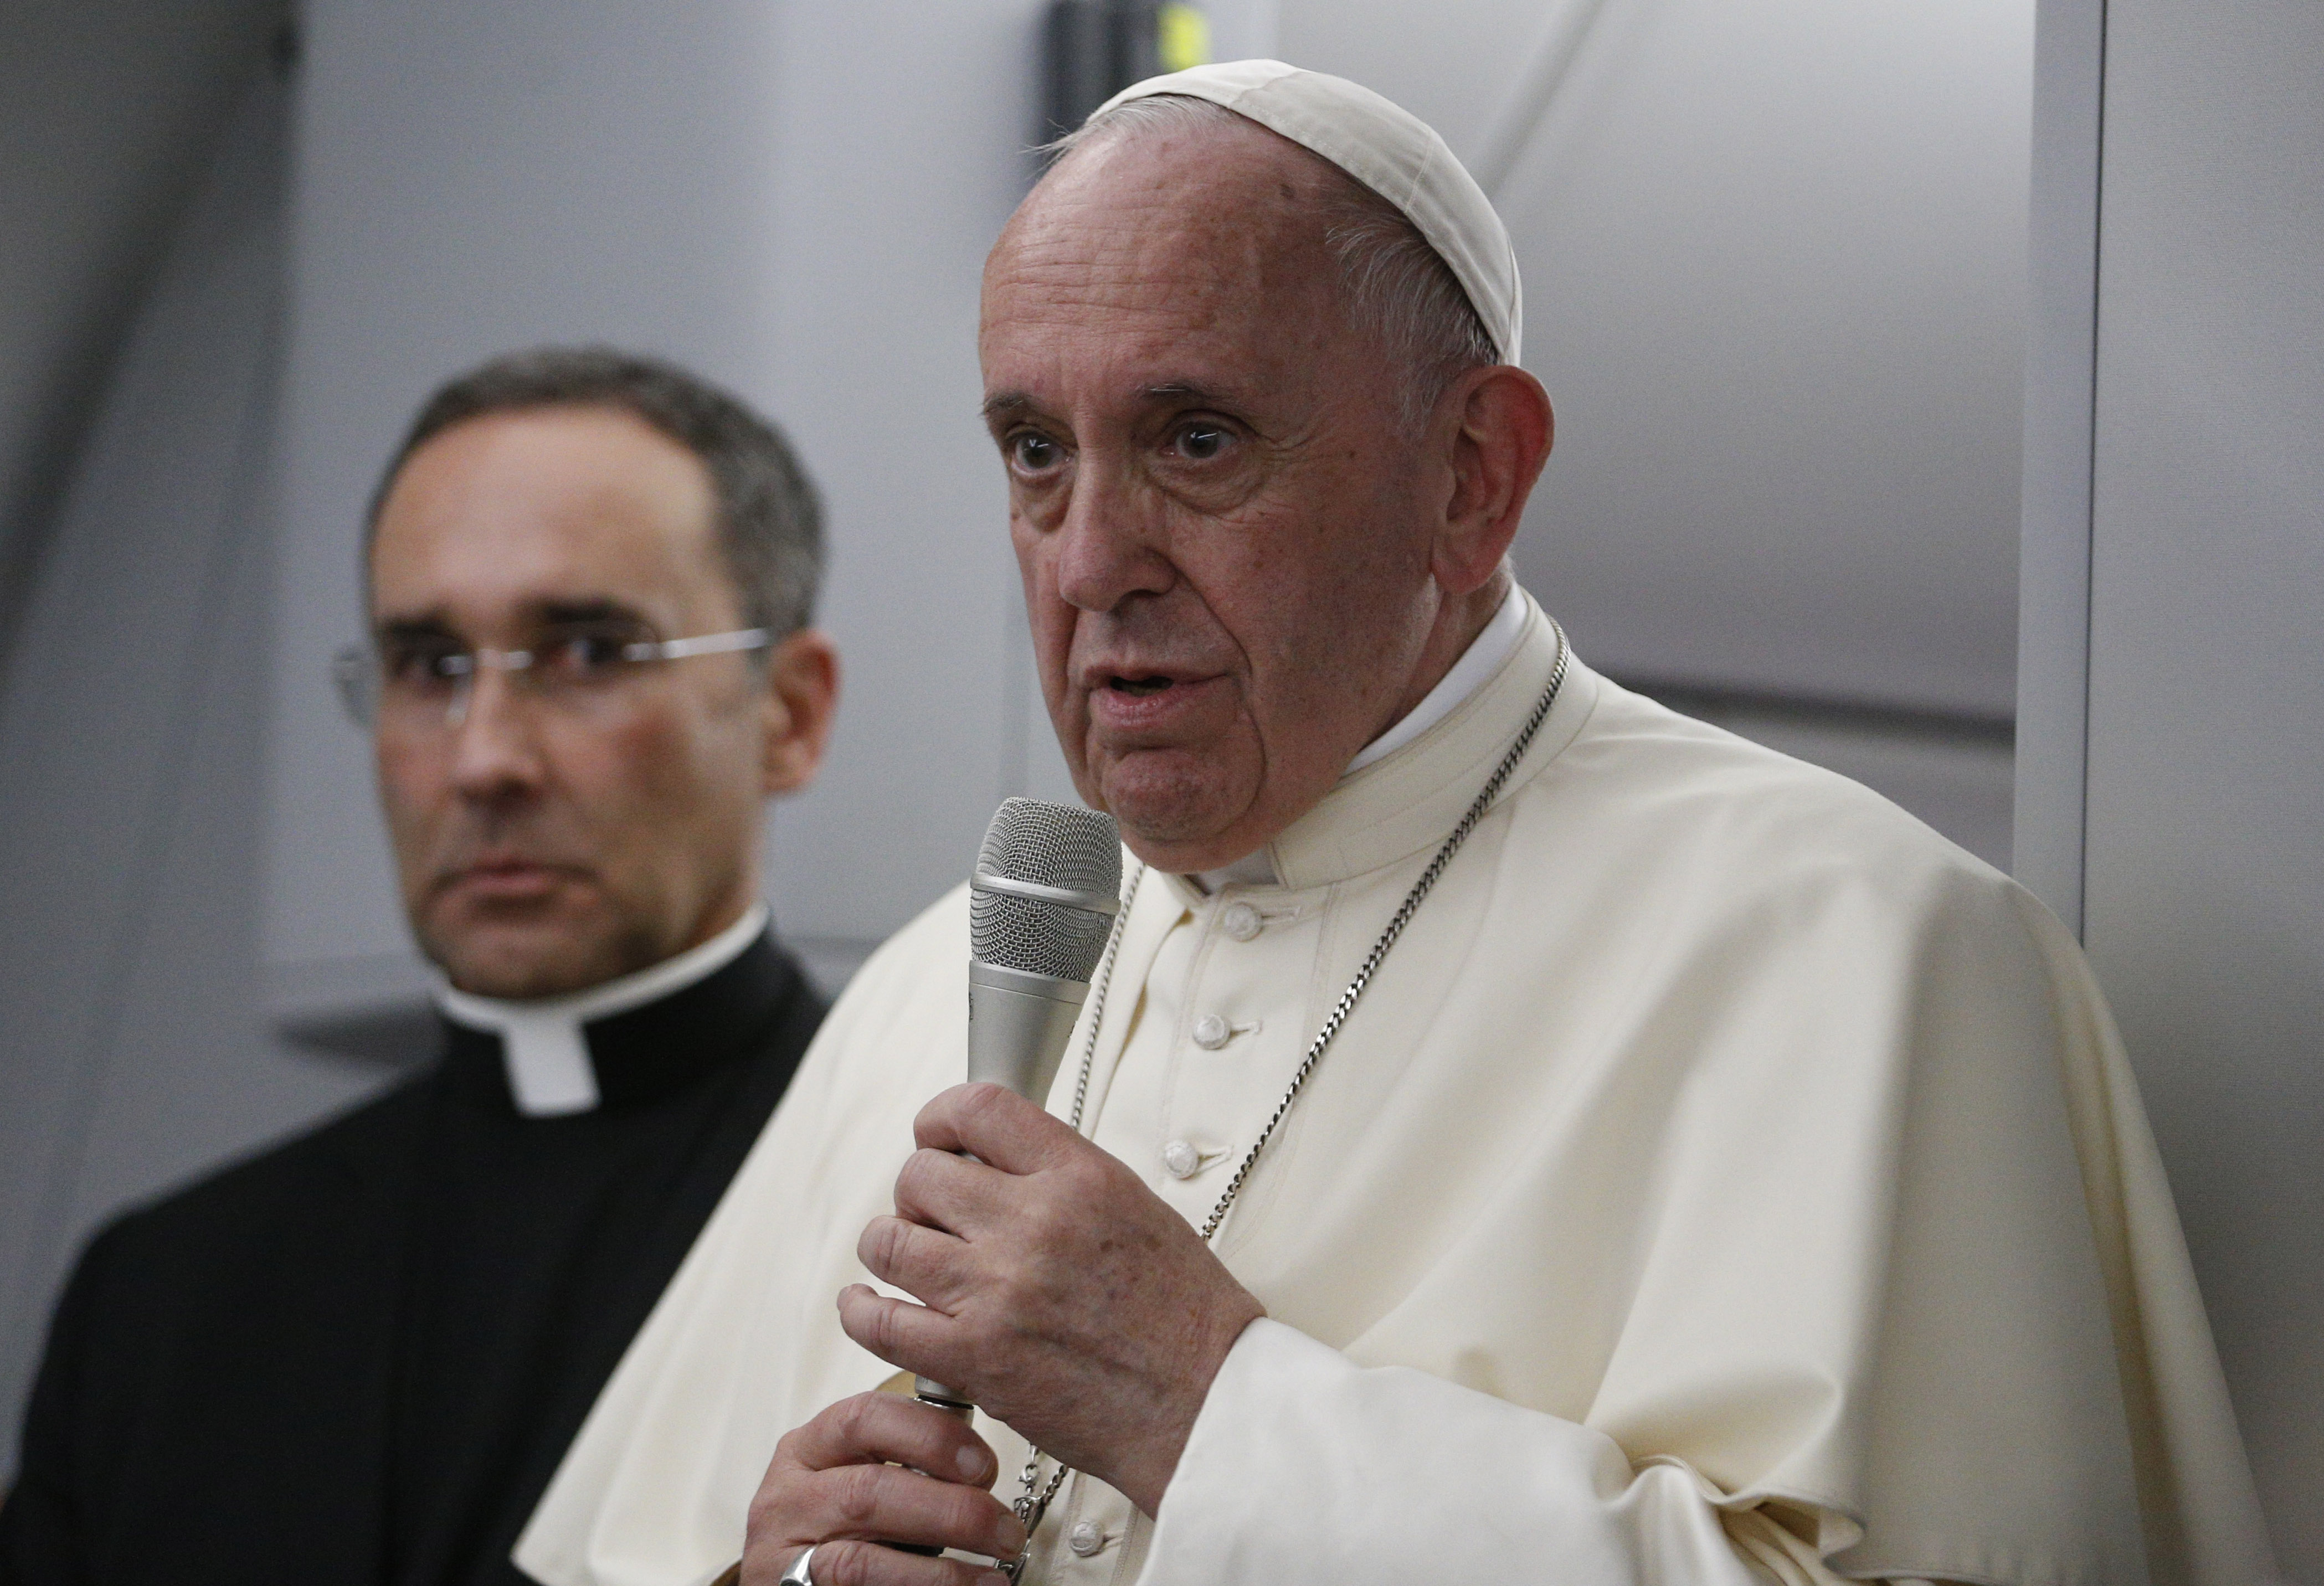 Bishops must realise seriousness of abuse crisis, pope says